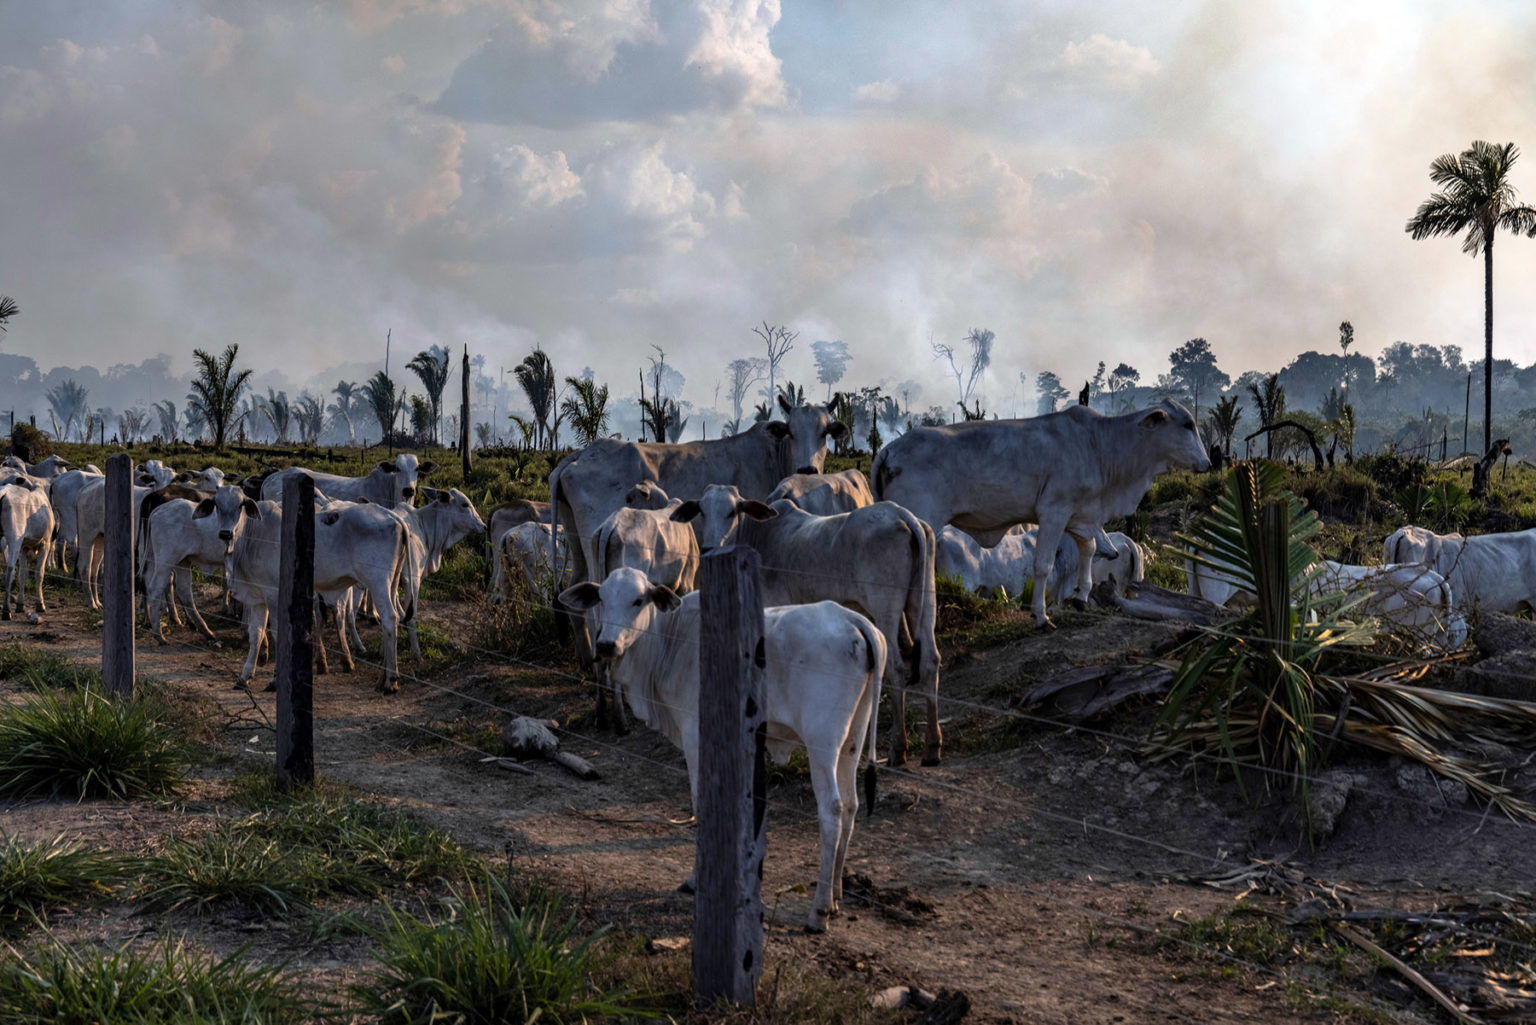 Cattle in a ranching area, next to a recently deforested and burnt area, in Candeias do Jamari, Rondônia state, Brazil. Photo: Victor Moriyama / Amazônia em Chamas 